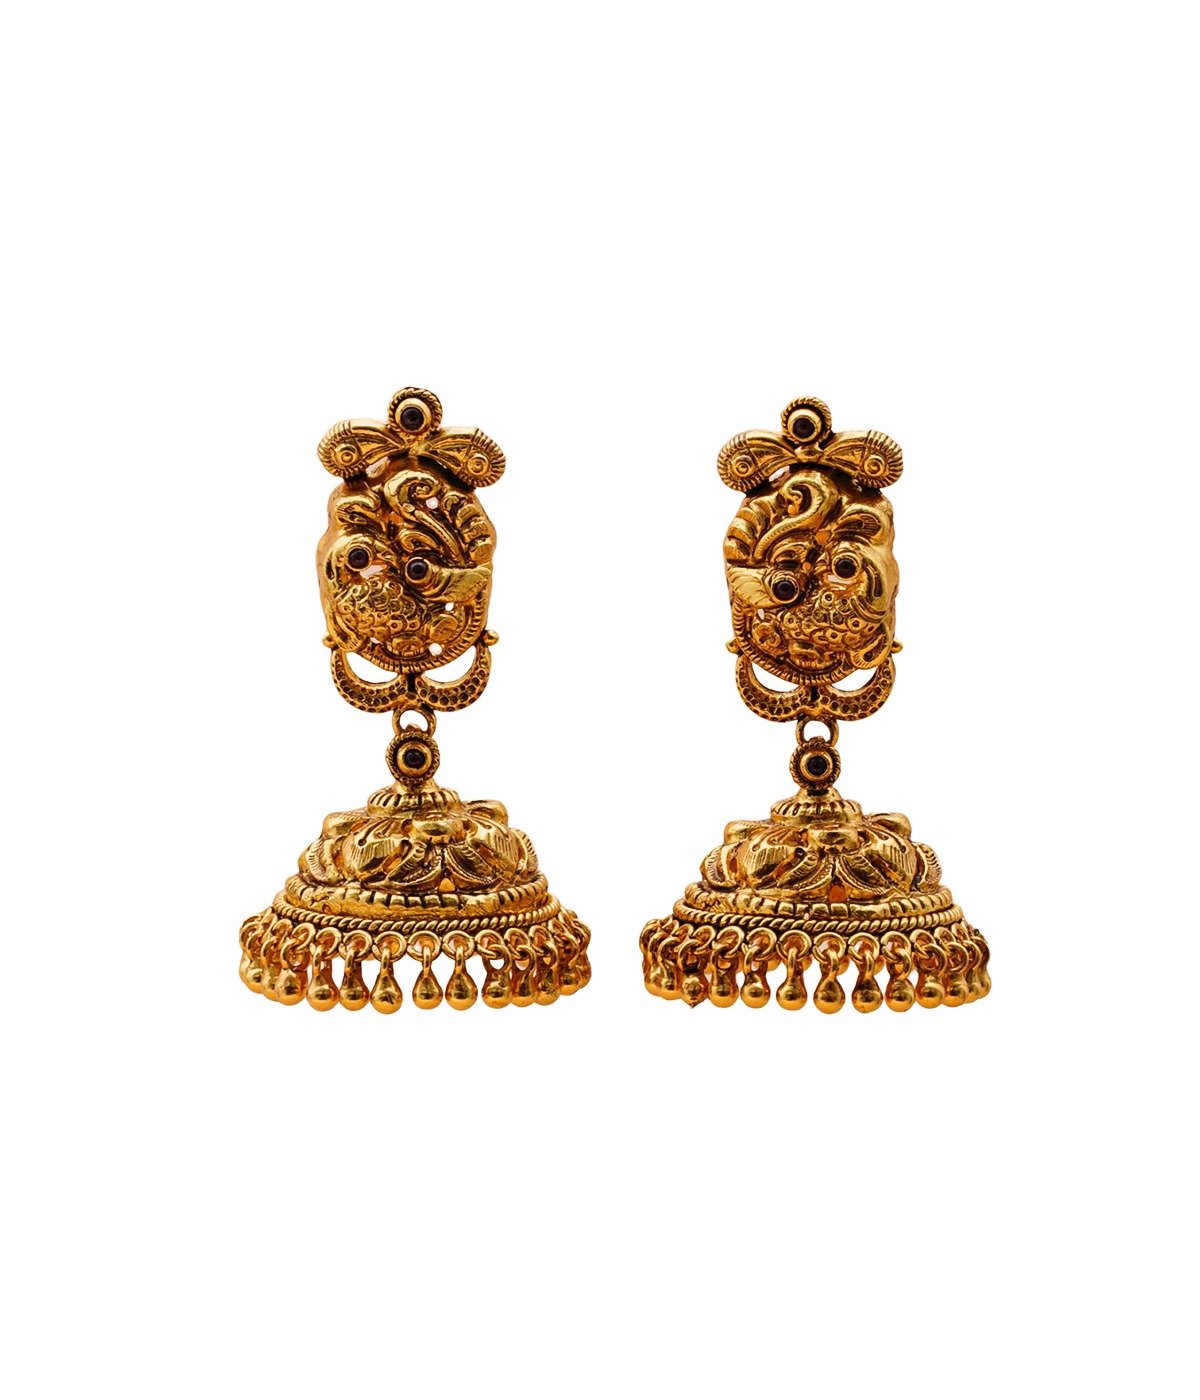 92.5 SILVER GOLD POLISHED TRADITONAL PEACOCK DESIGN JHUMKI FOR WOMEN AND GIRLS